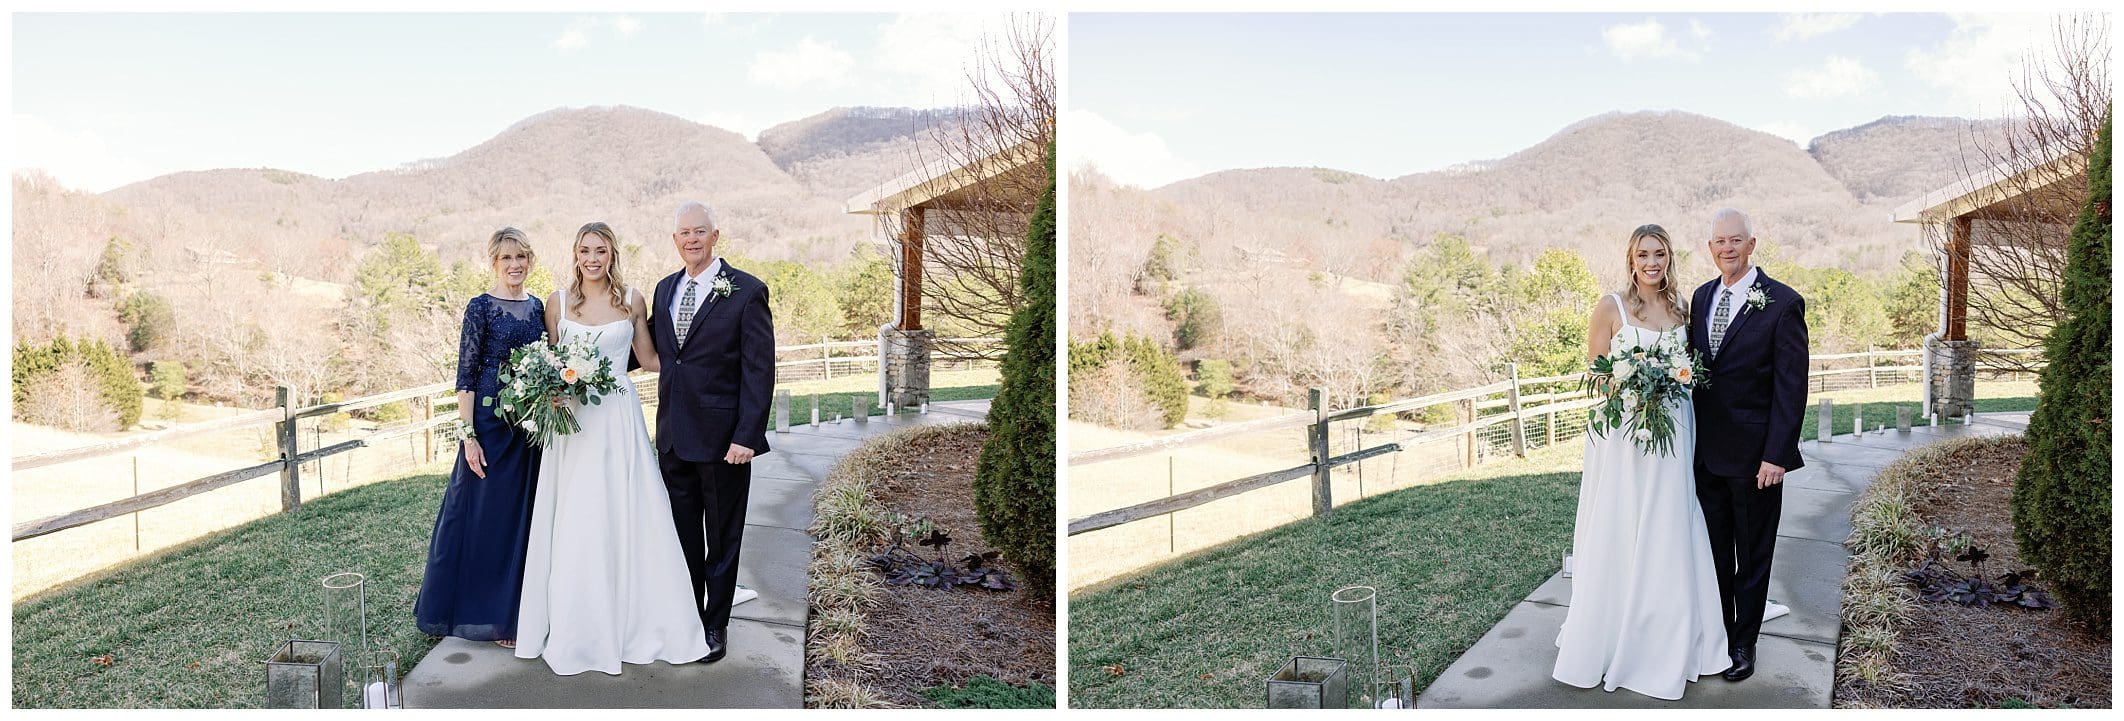 Two photos of a bride and groom posing in front of a mountain.